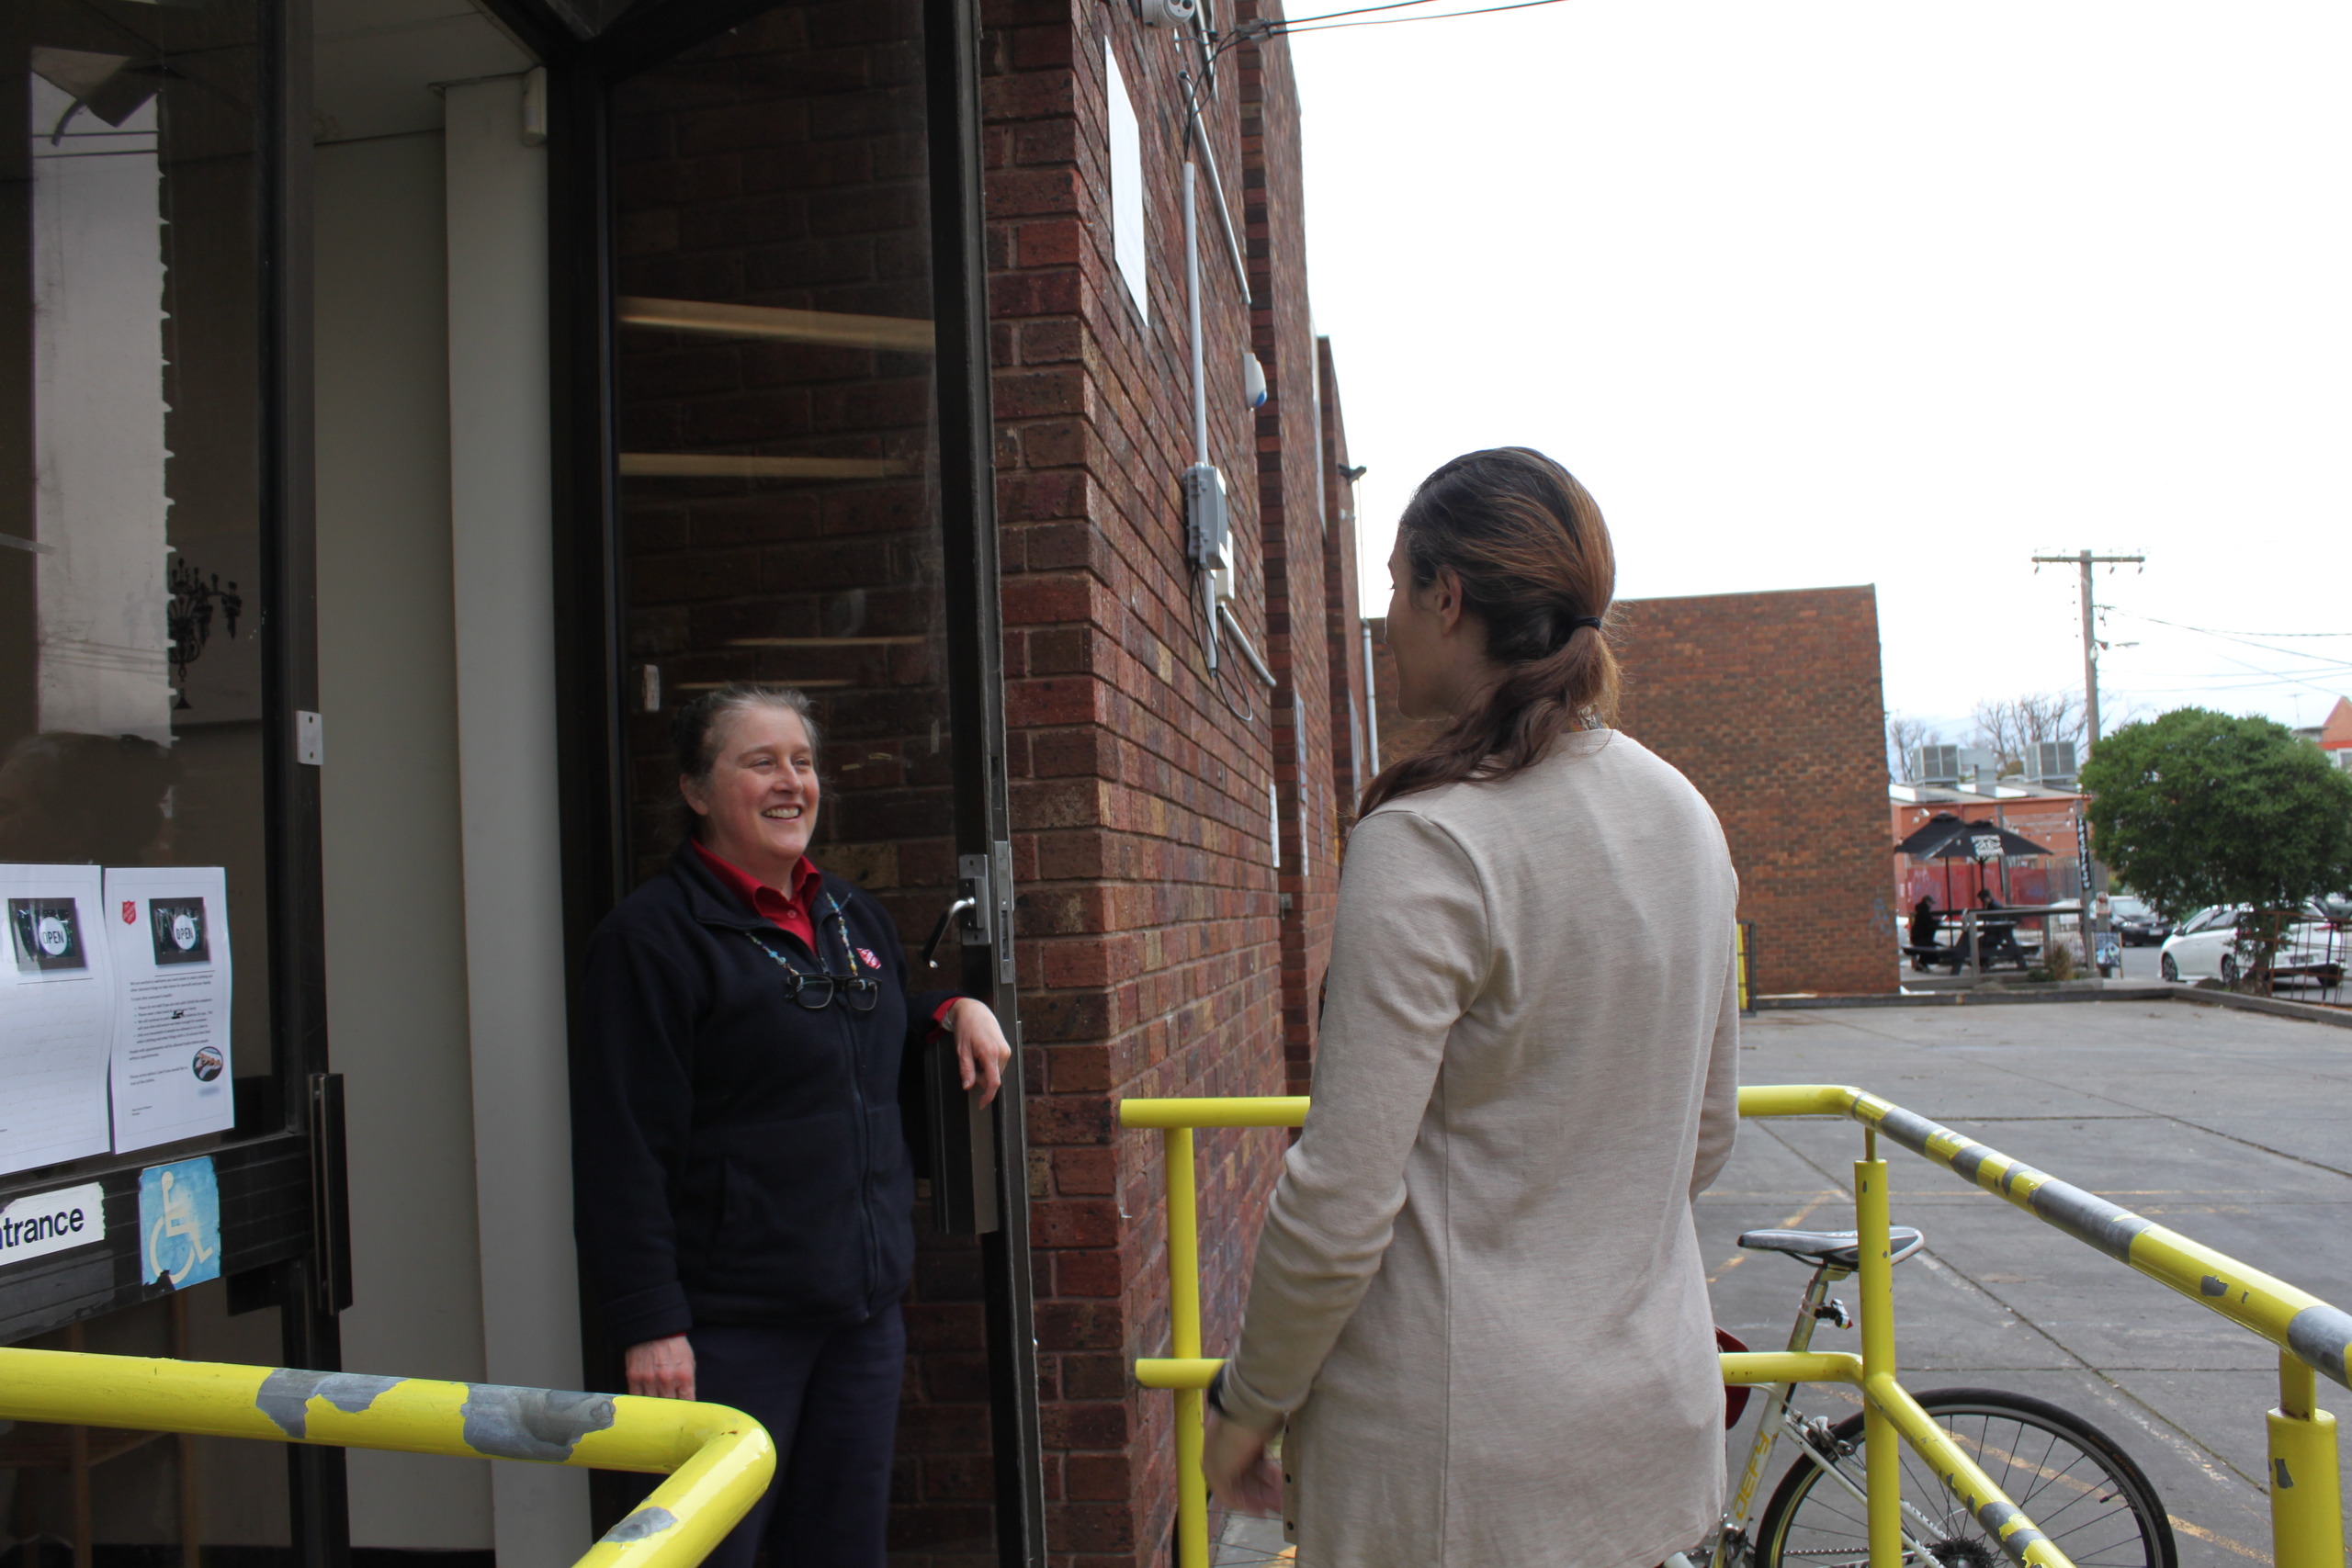 Karen welcoming a woman to The Salvation Army Asylum Seeker and Refugee Service